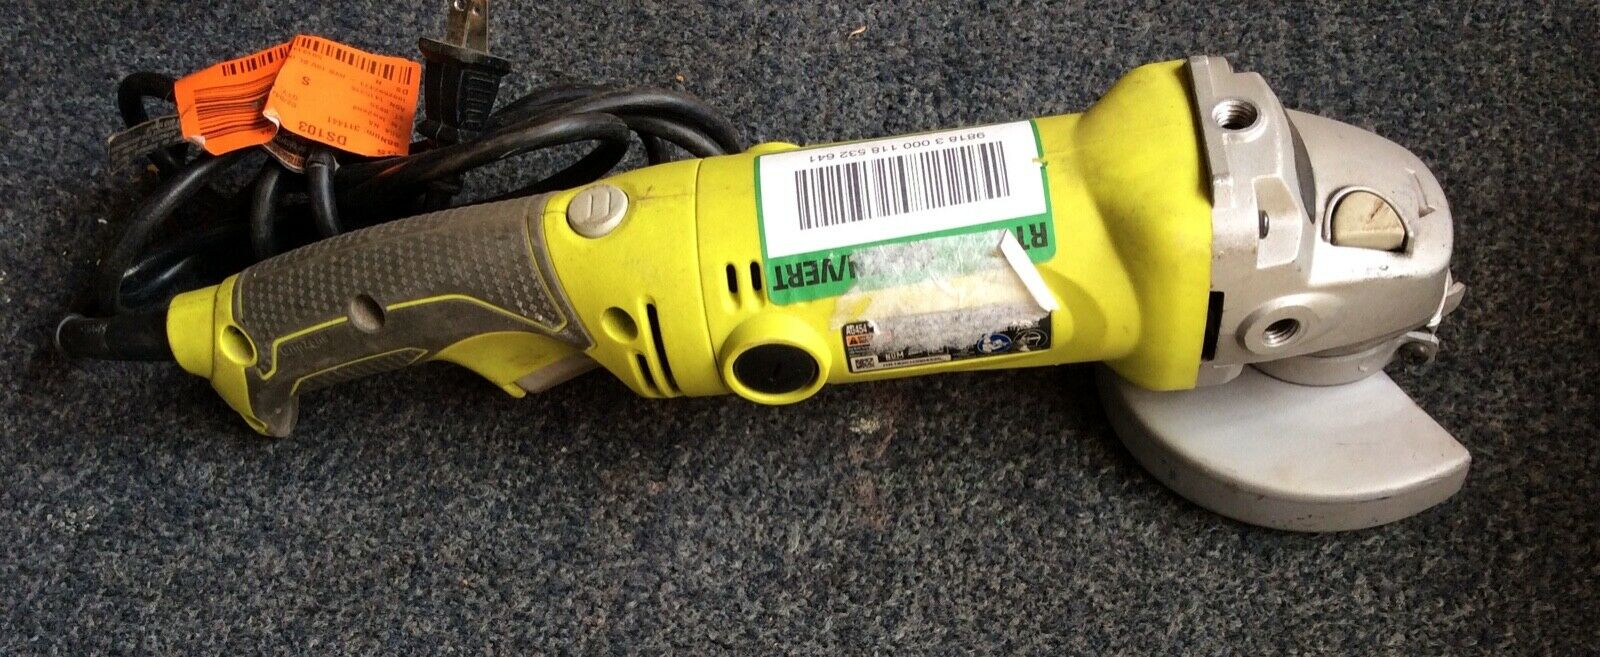 Ryobi  Corded 4-1/2 in. Angle Grinder 7.5 amp LIGHTLY USED, WORKS PERFECT!